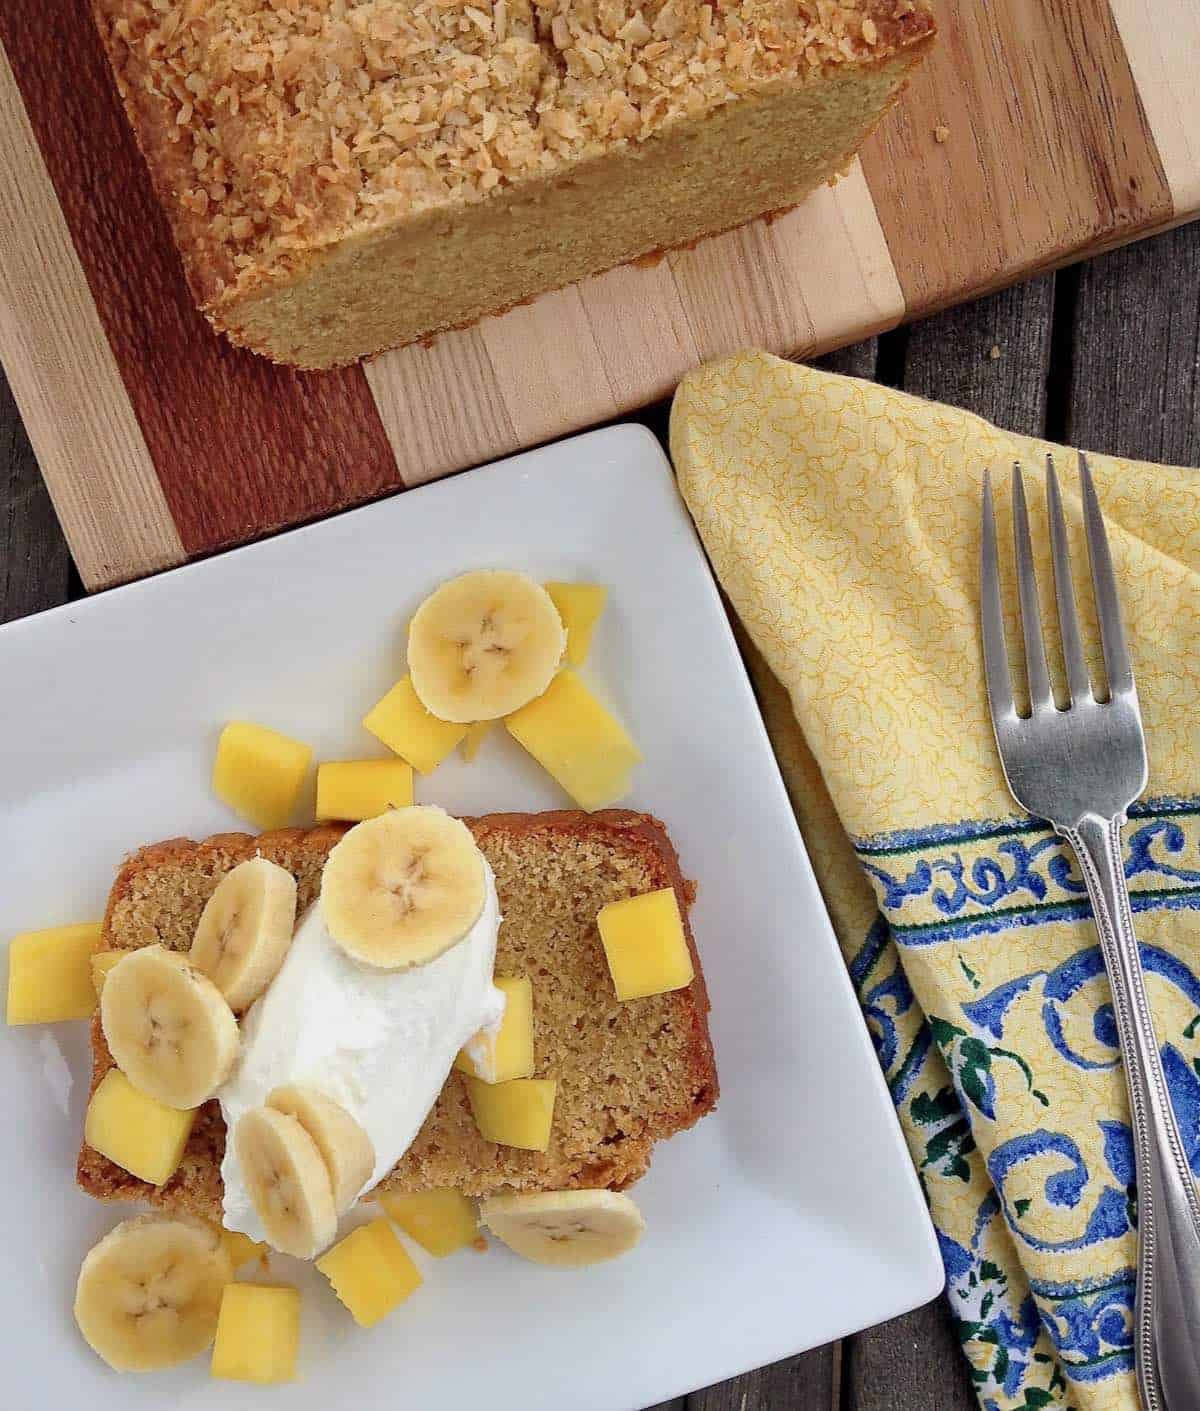 Easy coconut snack cake with banana and pineapple and yogurt on top.